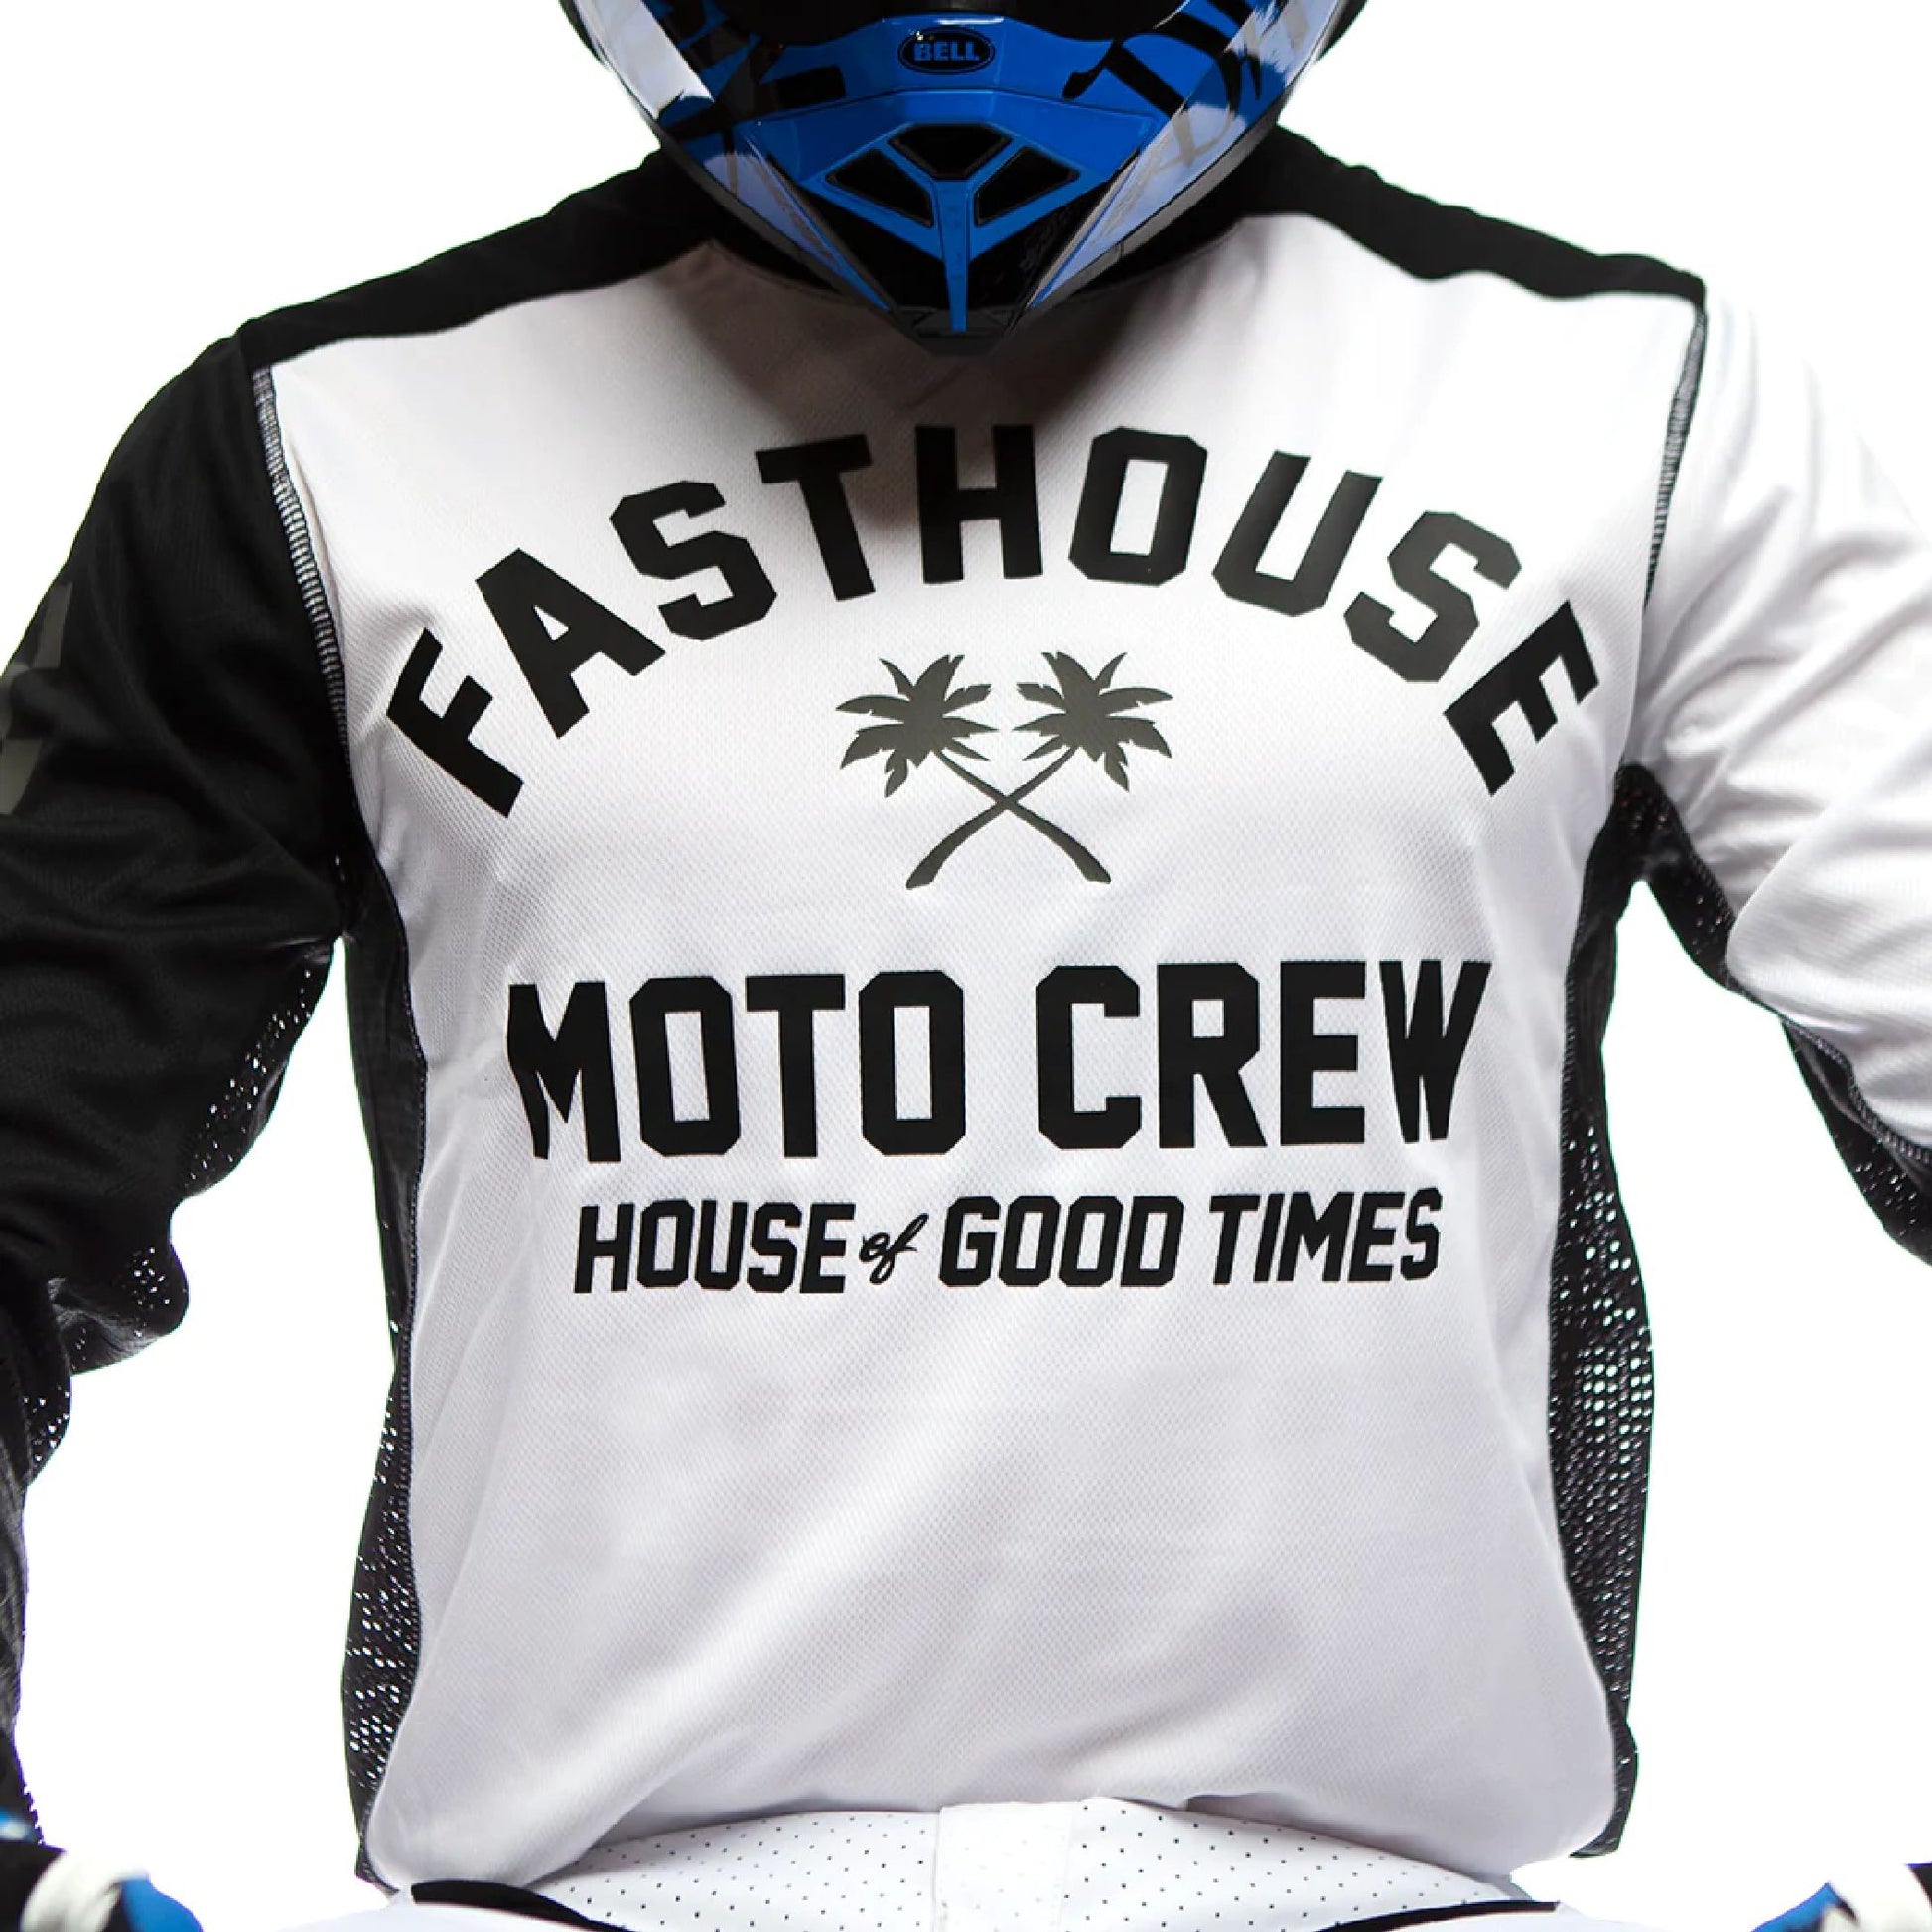 Fasthouse Youth Grindhouse Haven Jersey White Black - Fasthouse Bike Jerseys